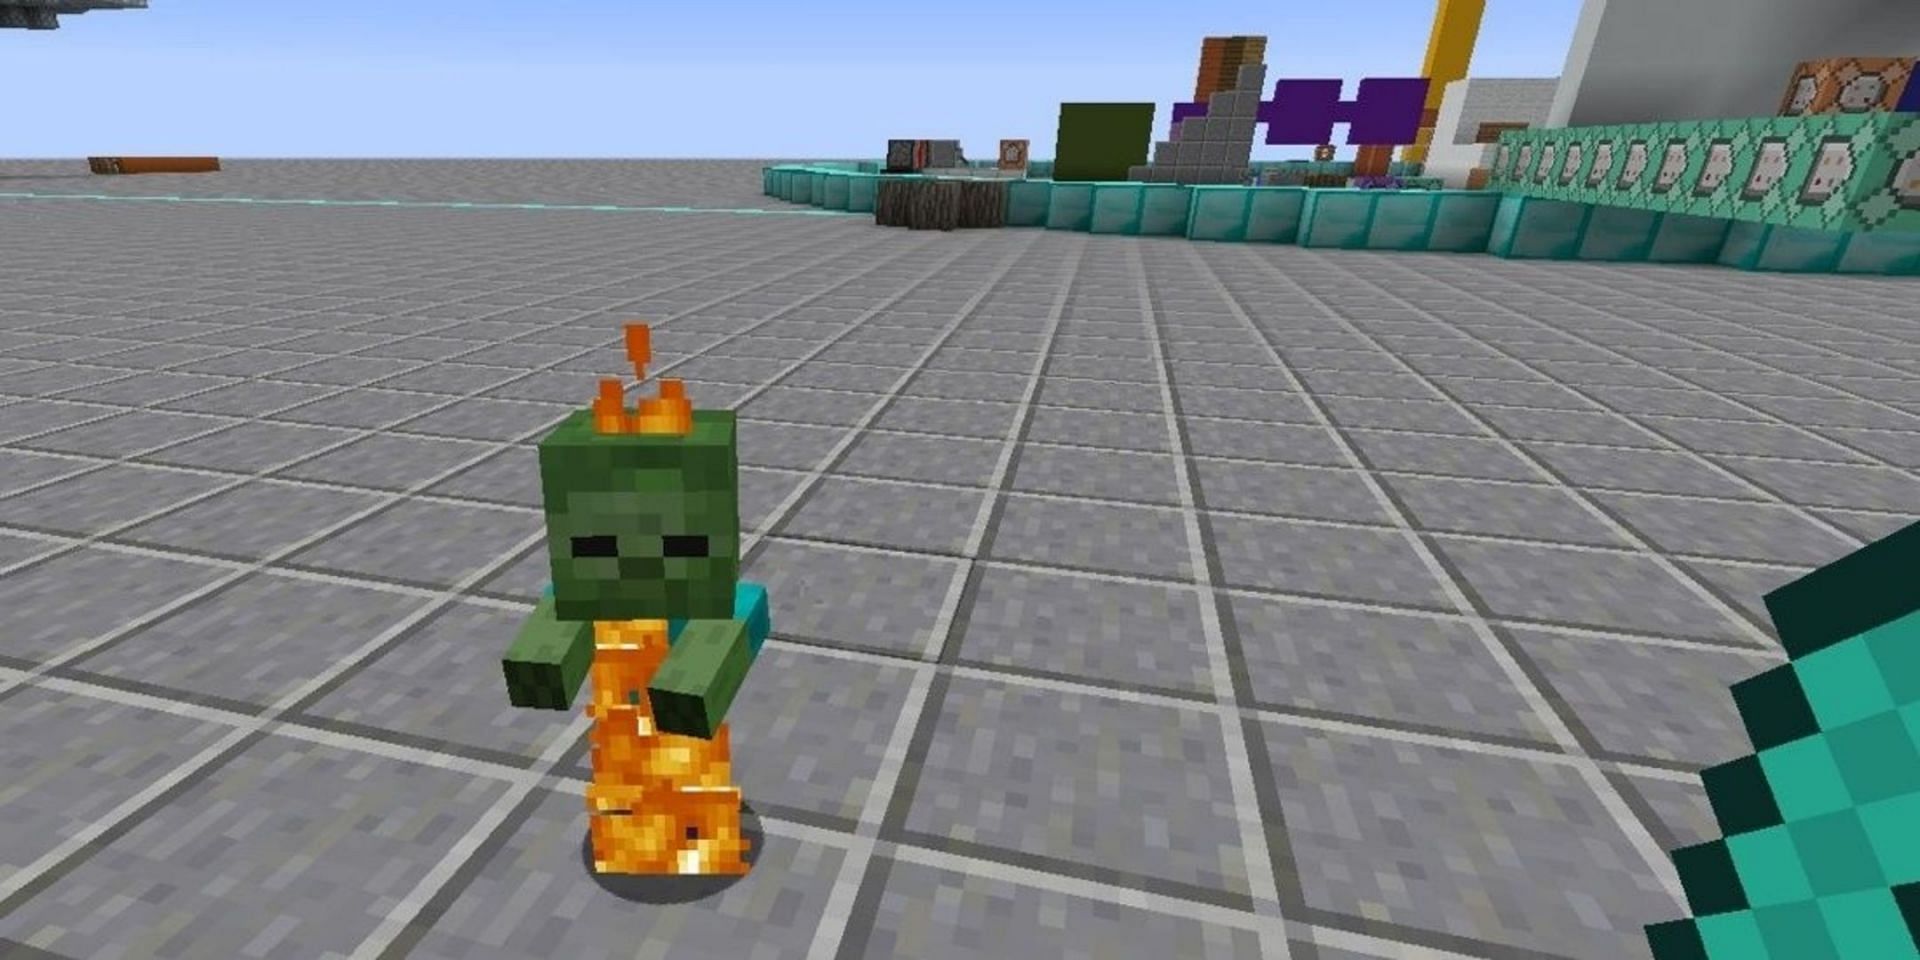 Undead mobs are set ablaze by sunlight (Image via Mojang)